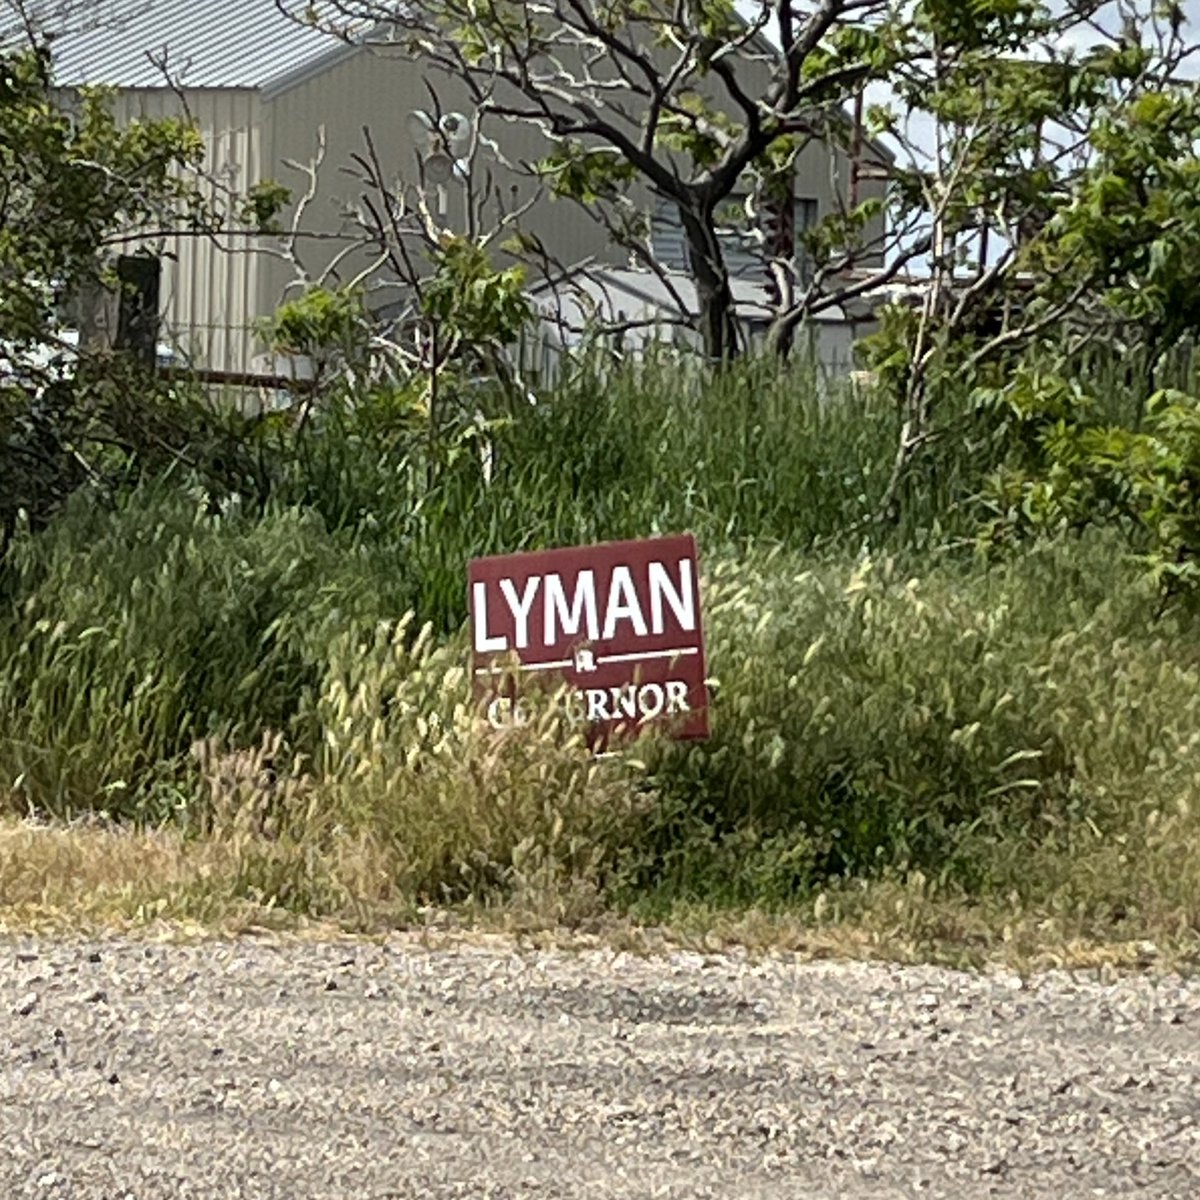 Spotted in West Haven

@phil_lyman 
#lymanforgovernor